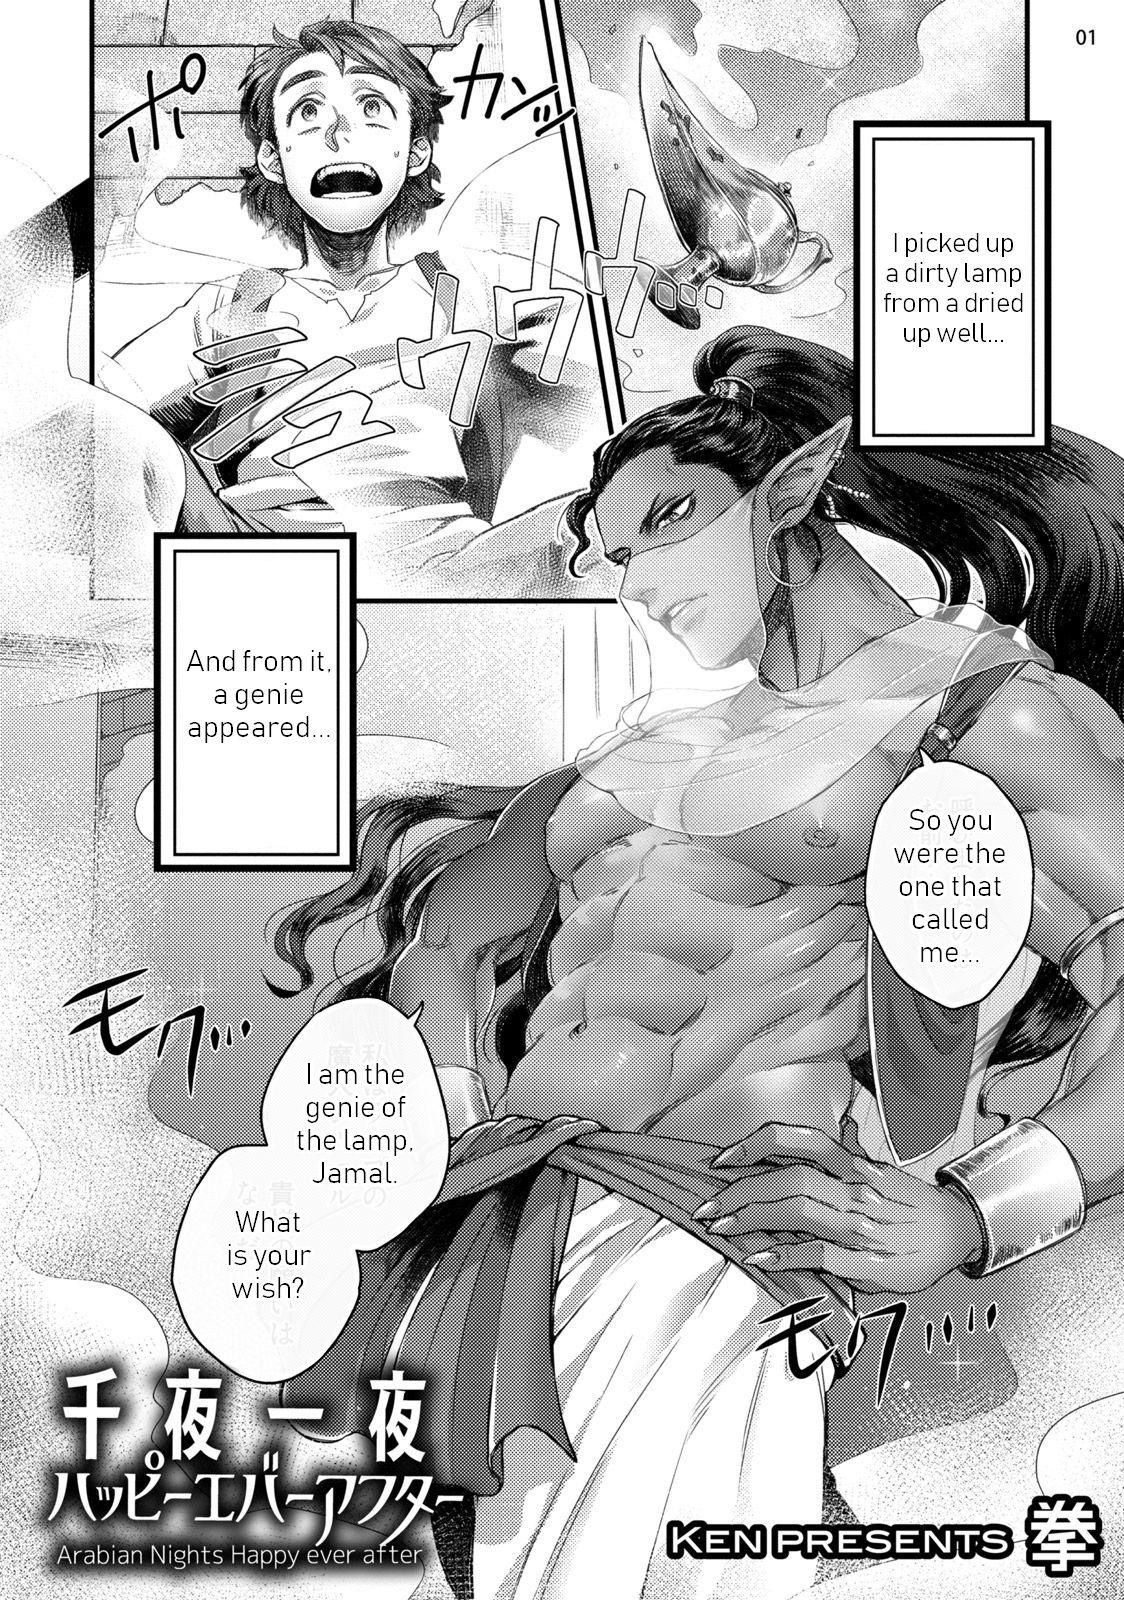 New Senya Ichiya Happy Ever After | Arabian Nights Happy ever after Pawg - Page 4